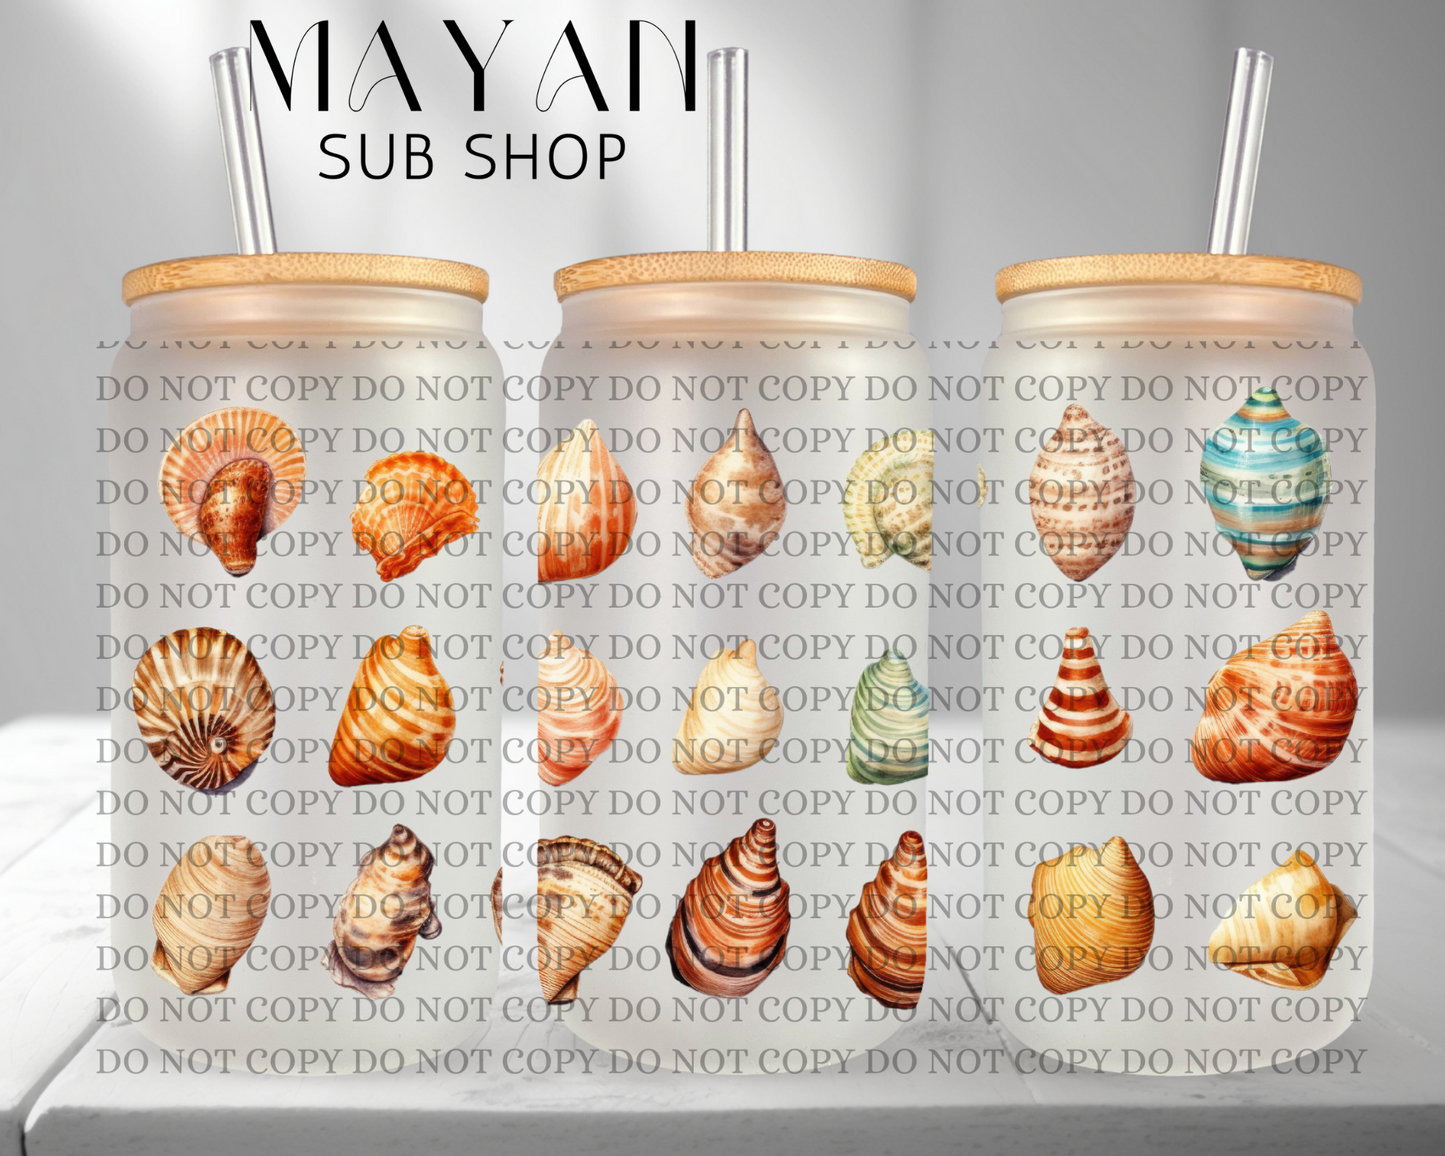 Seashells 16 oz. frosted glass can. - Mayan Sub Shop